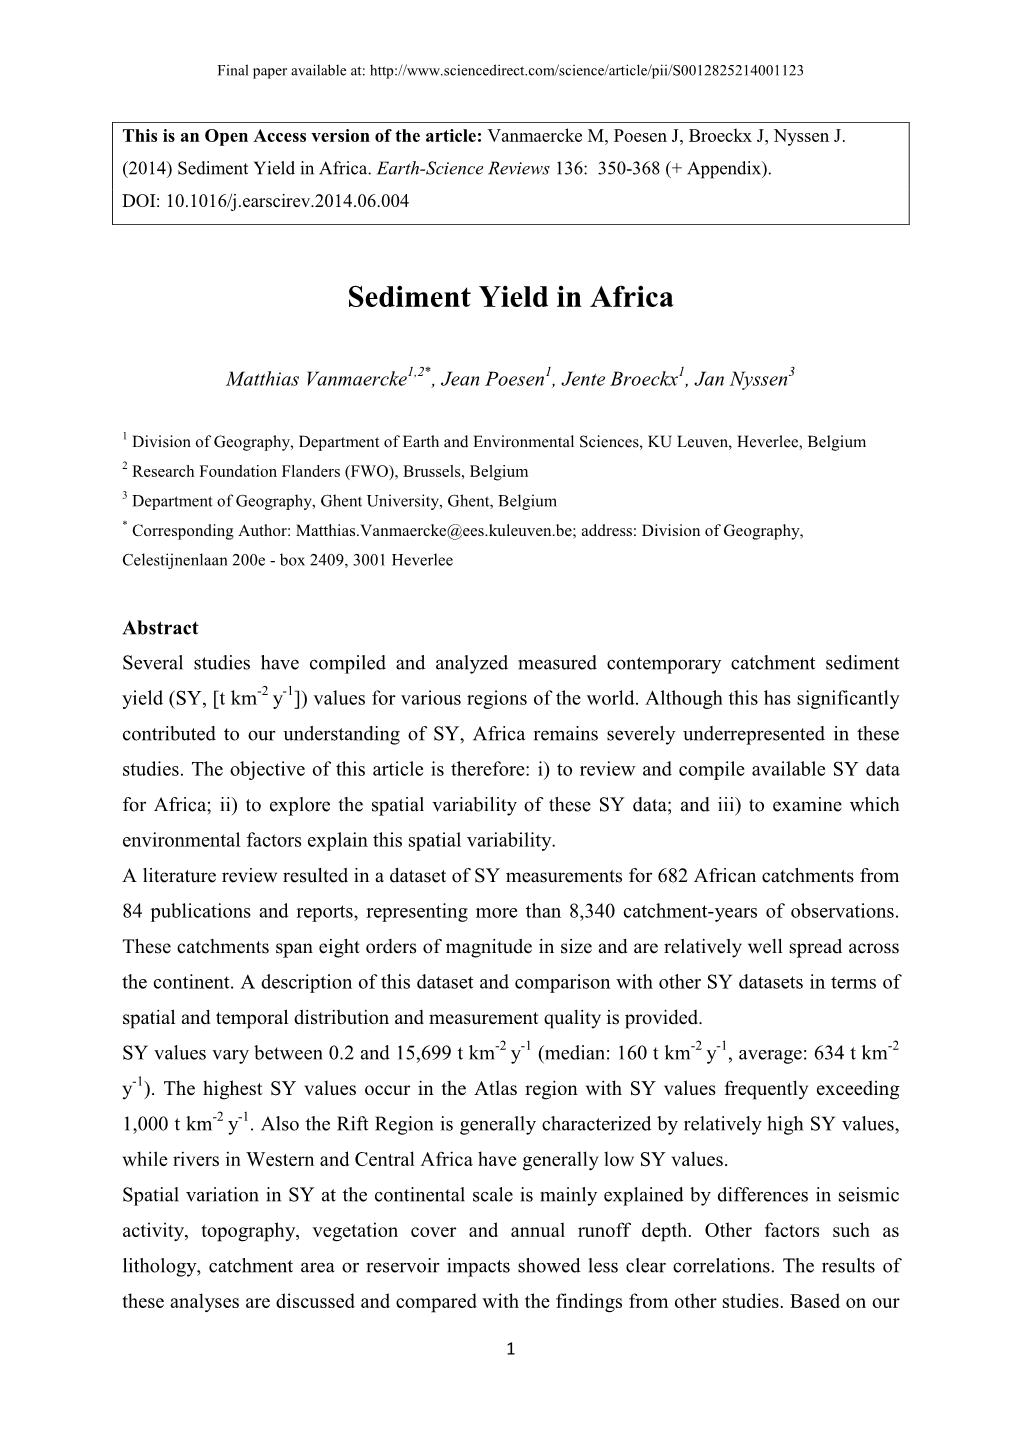 Sediment Yield in Africa